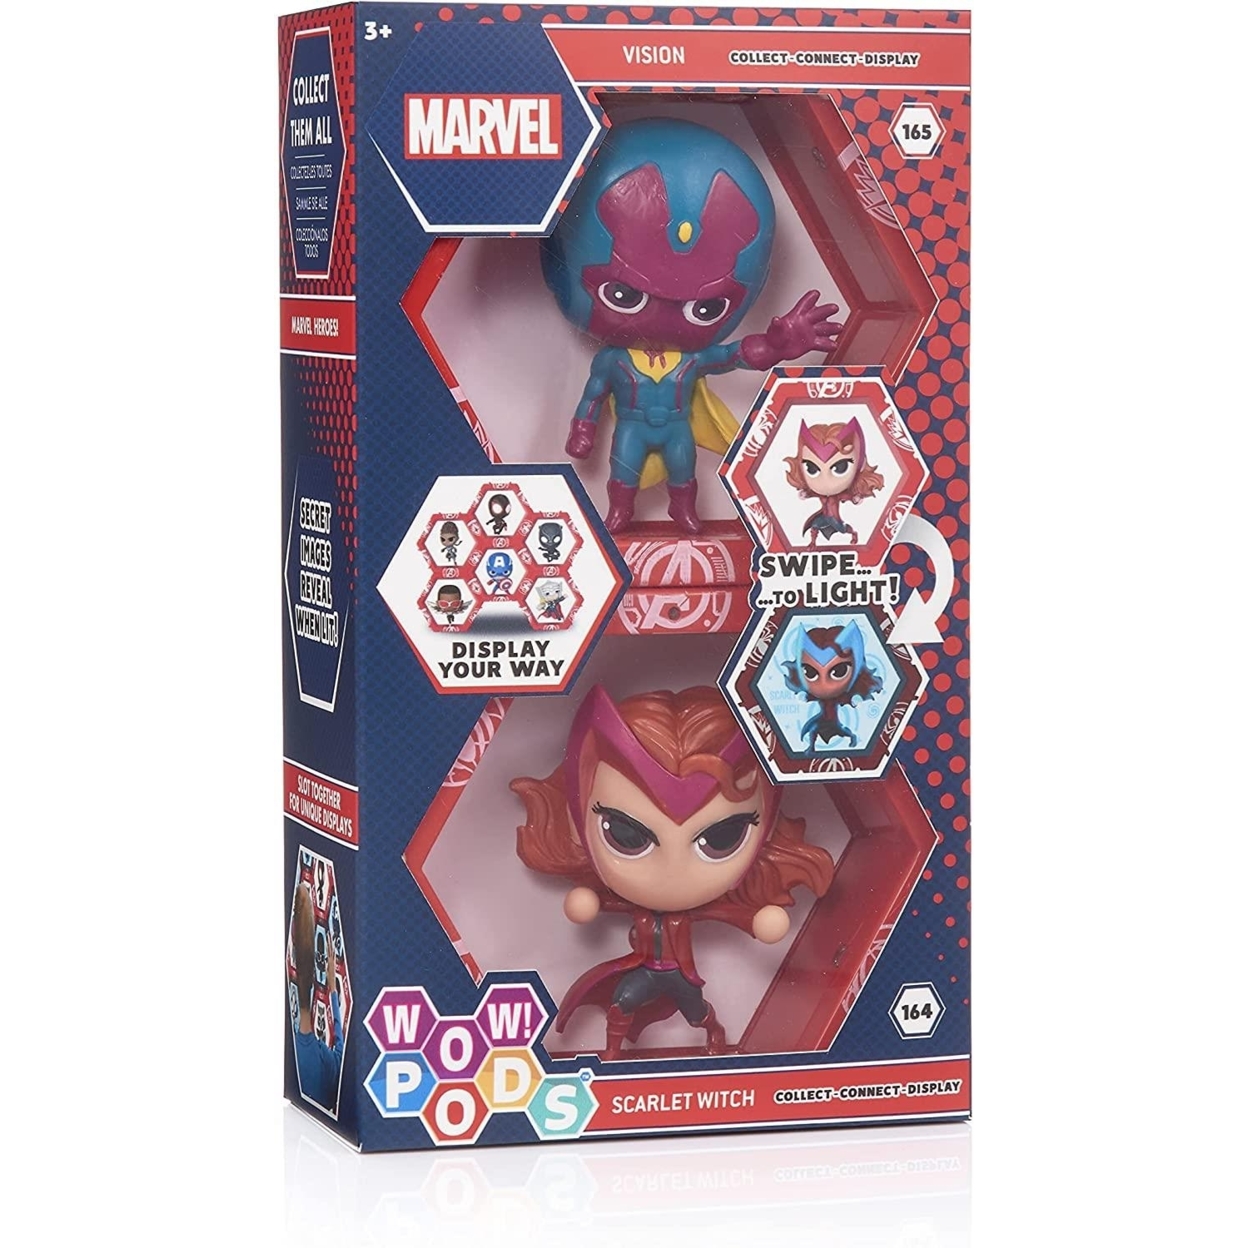 WOW Pods Vision & Scarlet Witch Avengers Ligh-Up Twin Pack Figures Connect Collectible WOW! Stuff